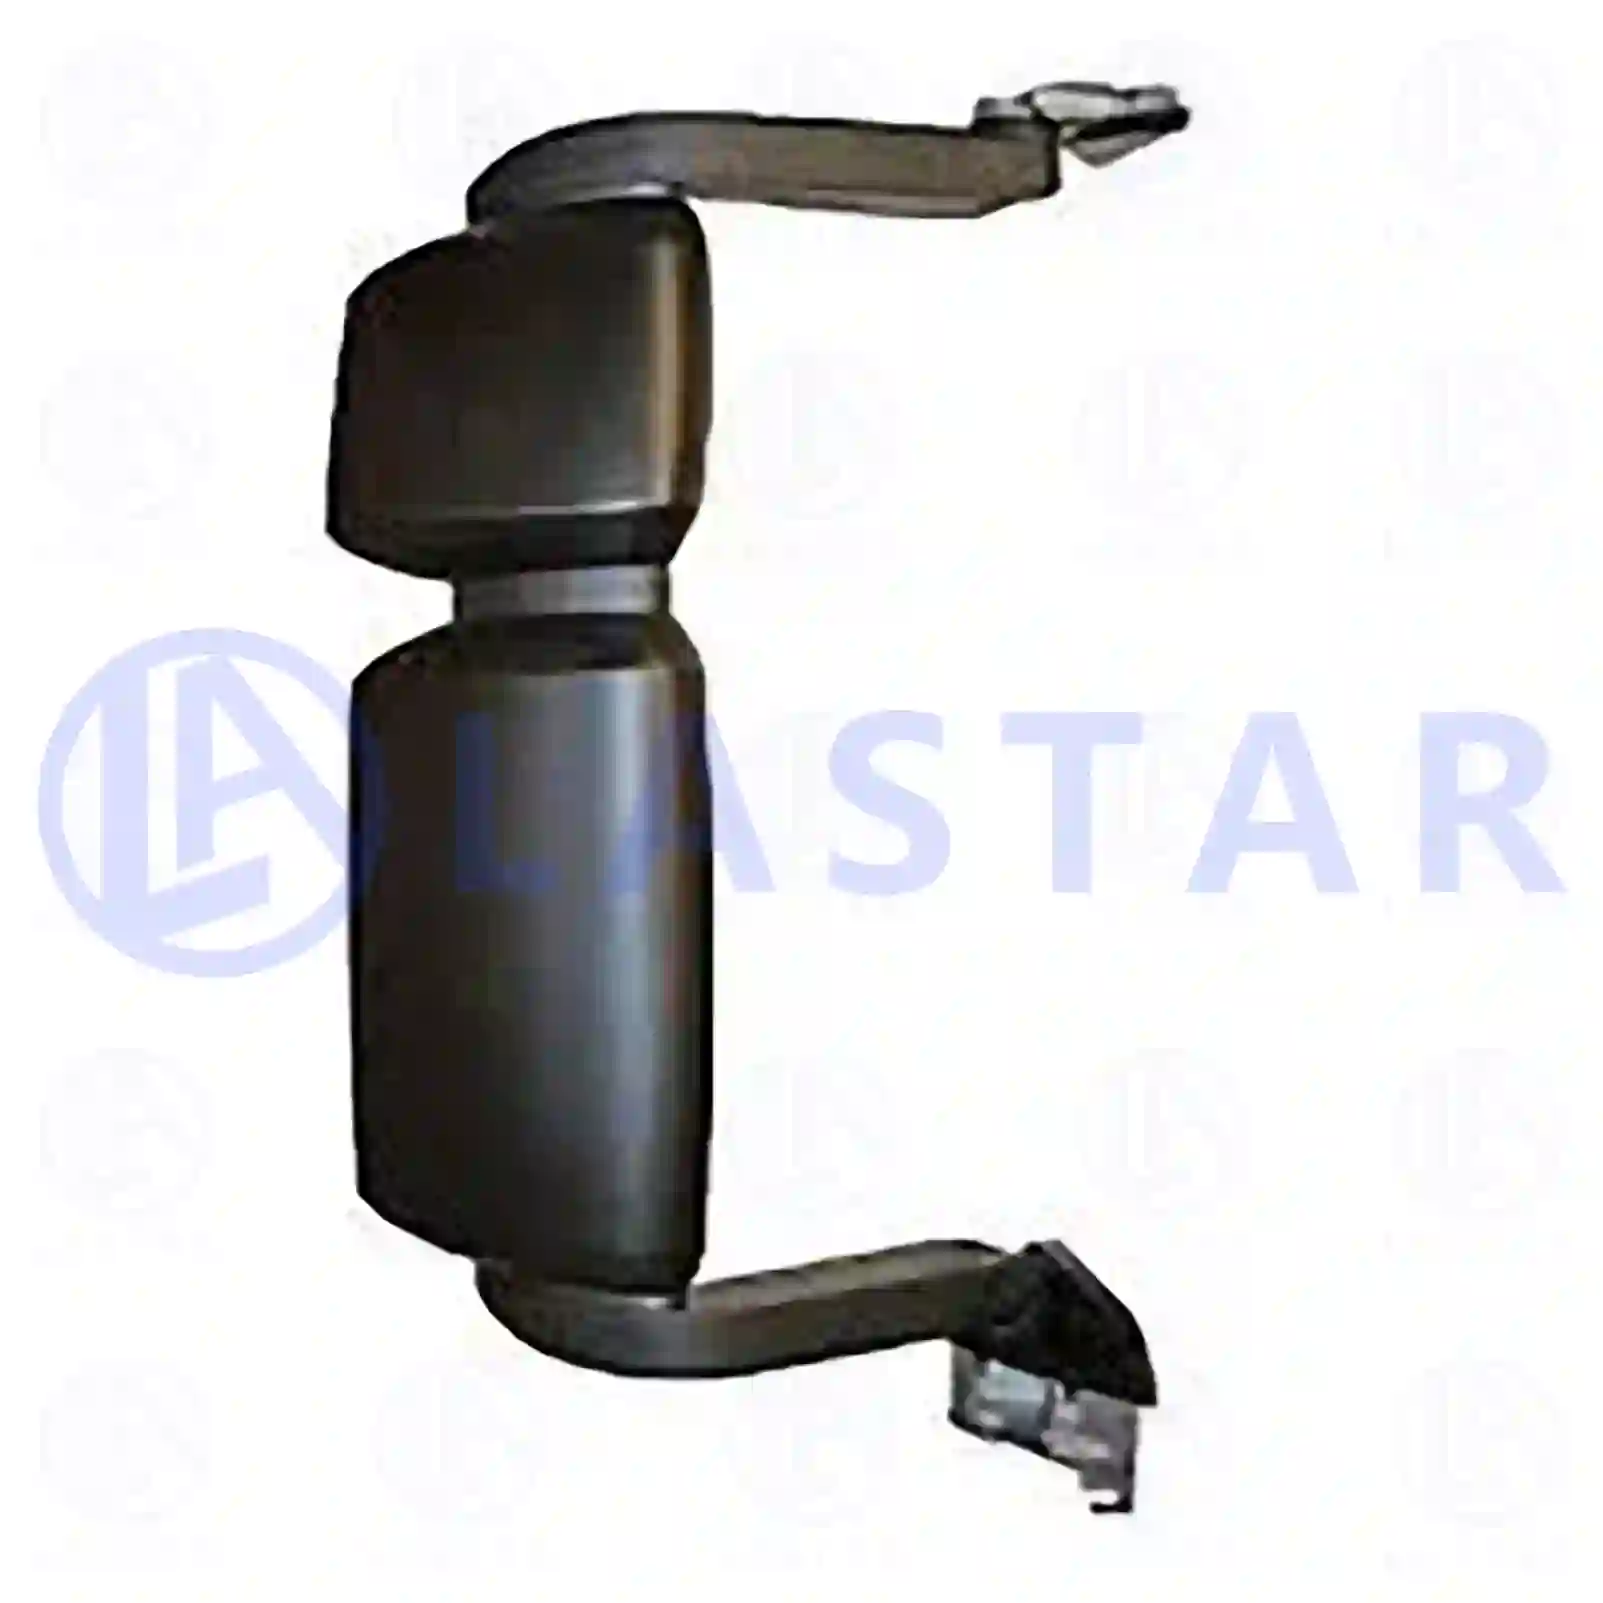 Main mirror, complete, left, heated, electrical, 77720820, 504150557, 504369999, ||  77720820 Lastar Spare Part | Truck Spare Parts, Auotomotive Spare Parts Main mirror, complete, left, heated, electrical, 77720820, 504150557, 504369999, ||  77720820 Lastar Spare Part | Truck Spare Parts, Auotomotive Spare Parts